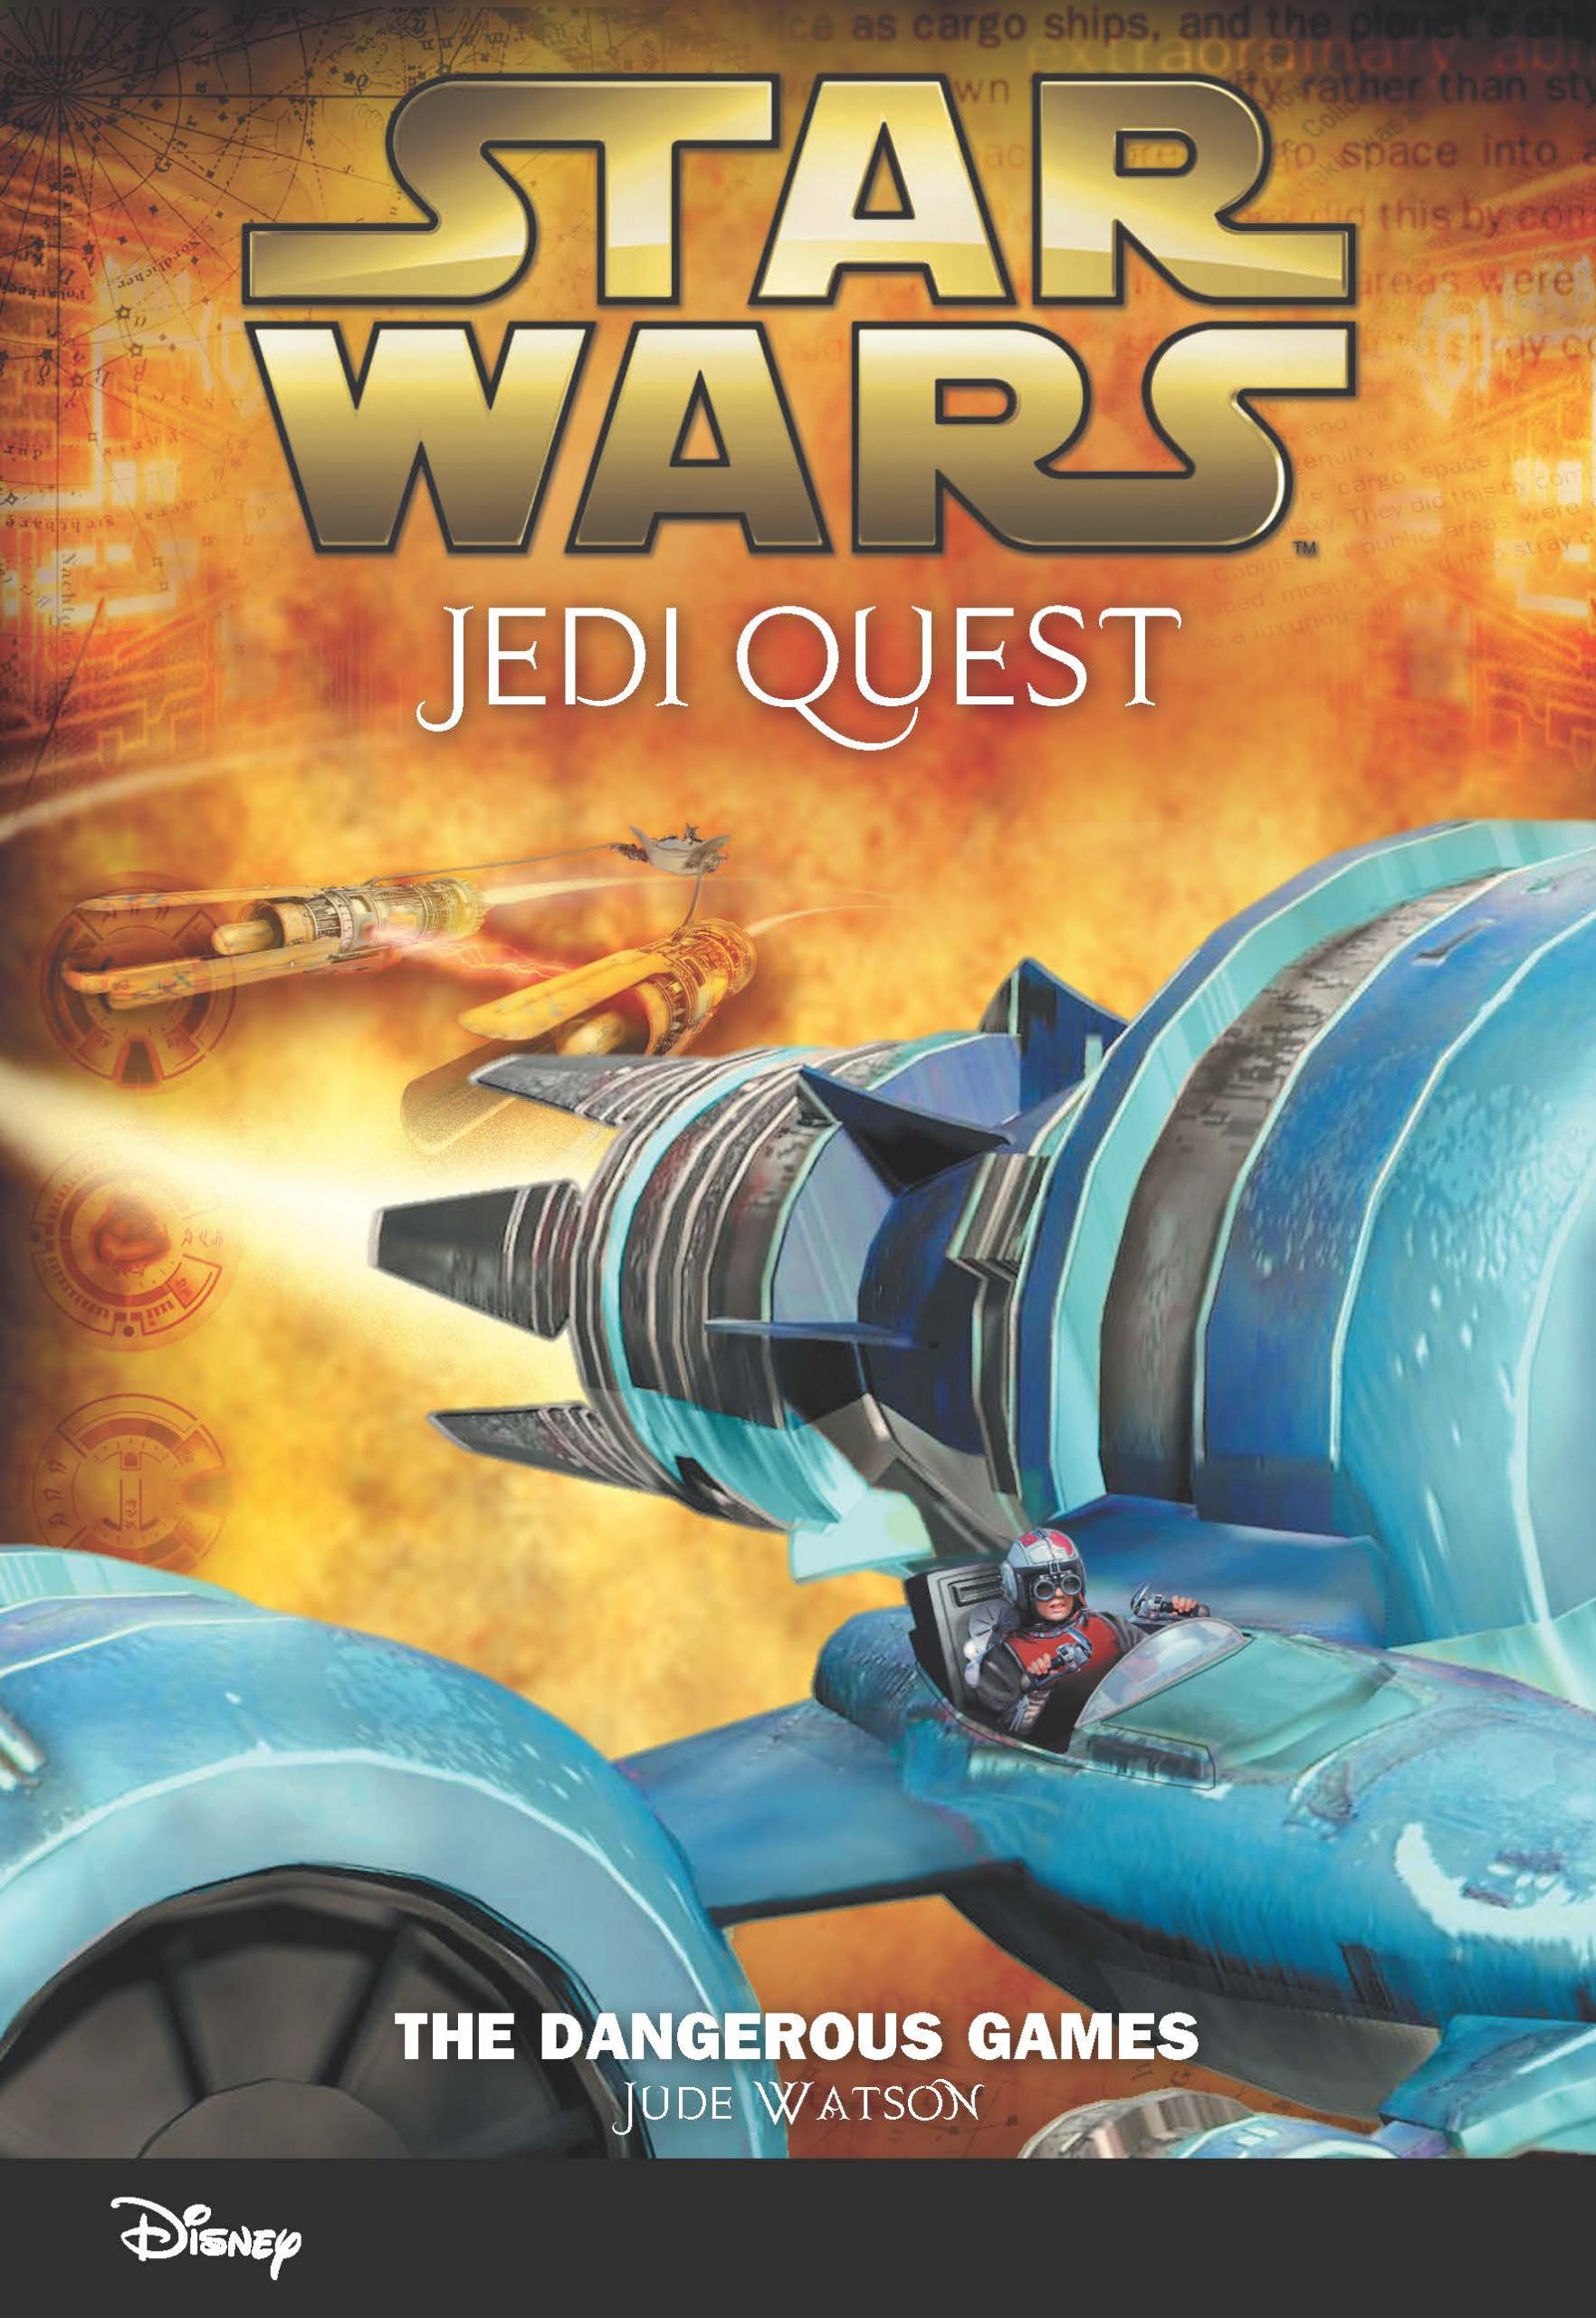 Secret Weapon (Volume 7) Star Wars: The Last of the Jedi by Jude